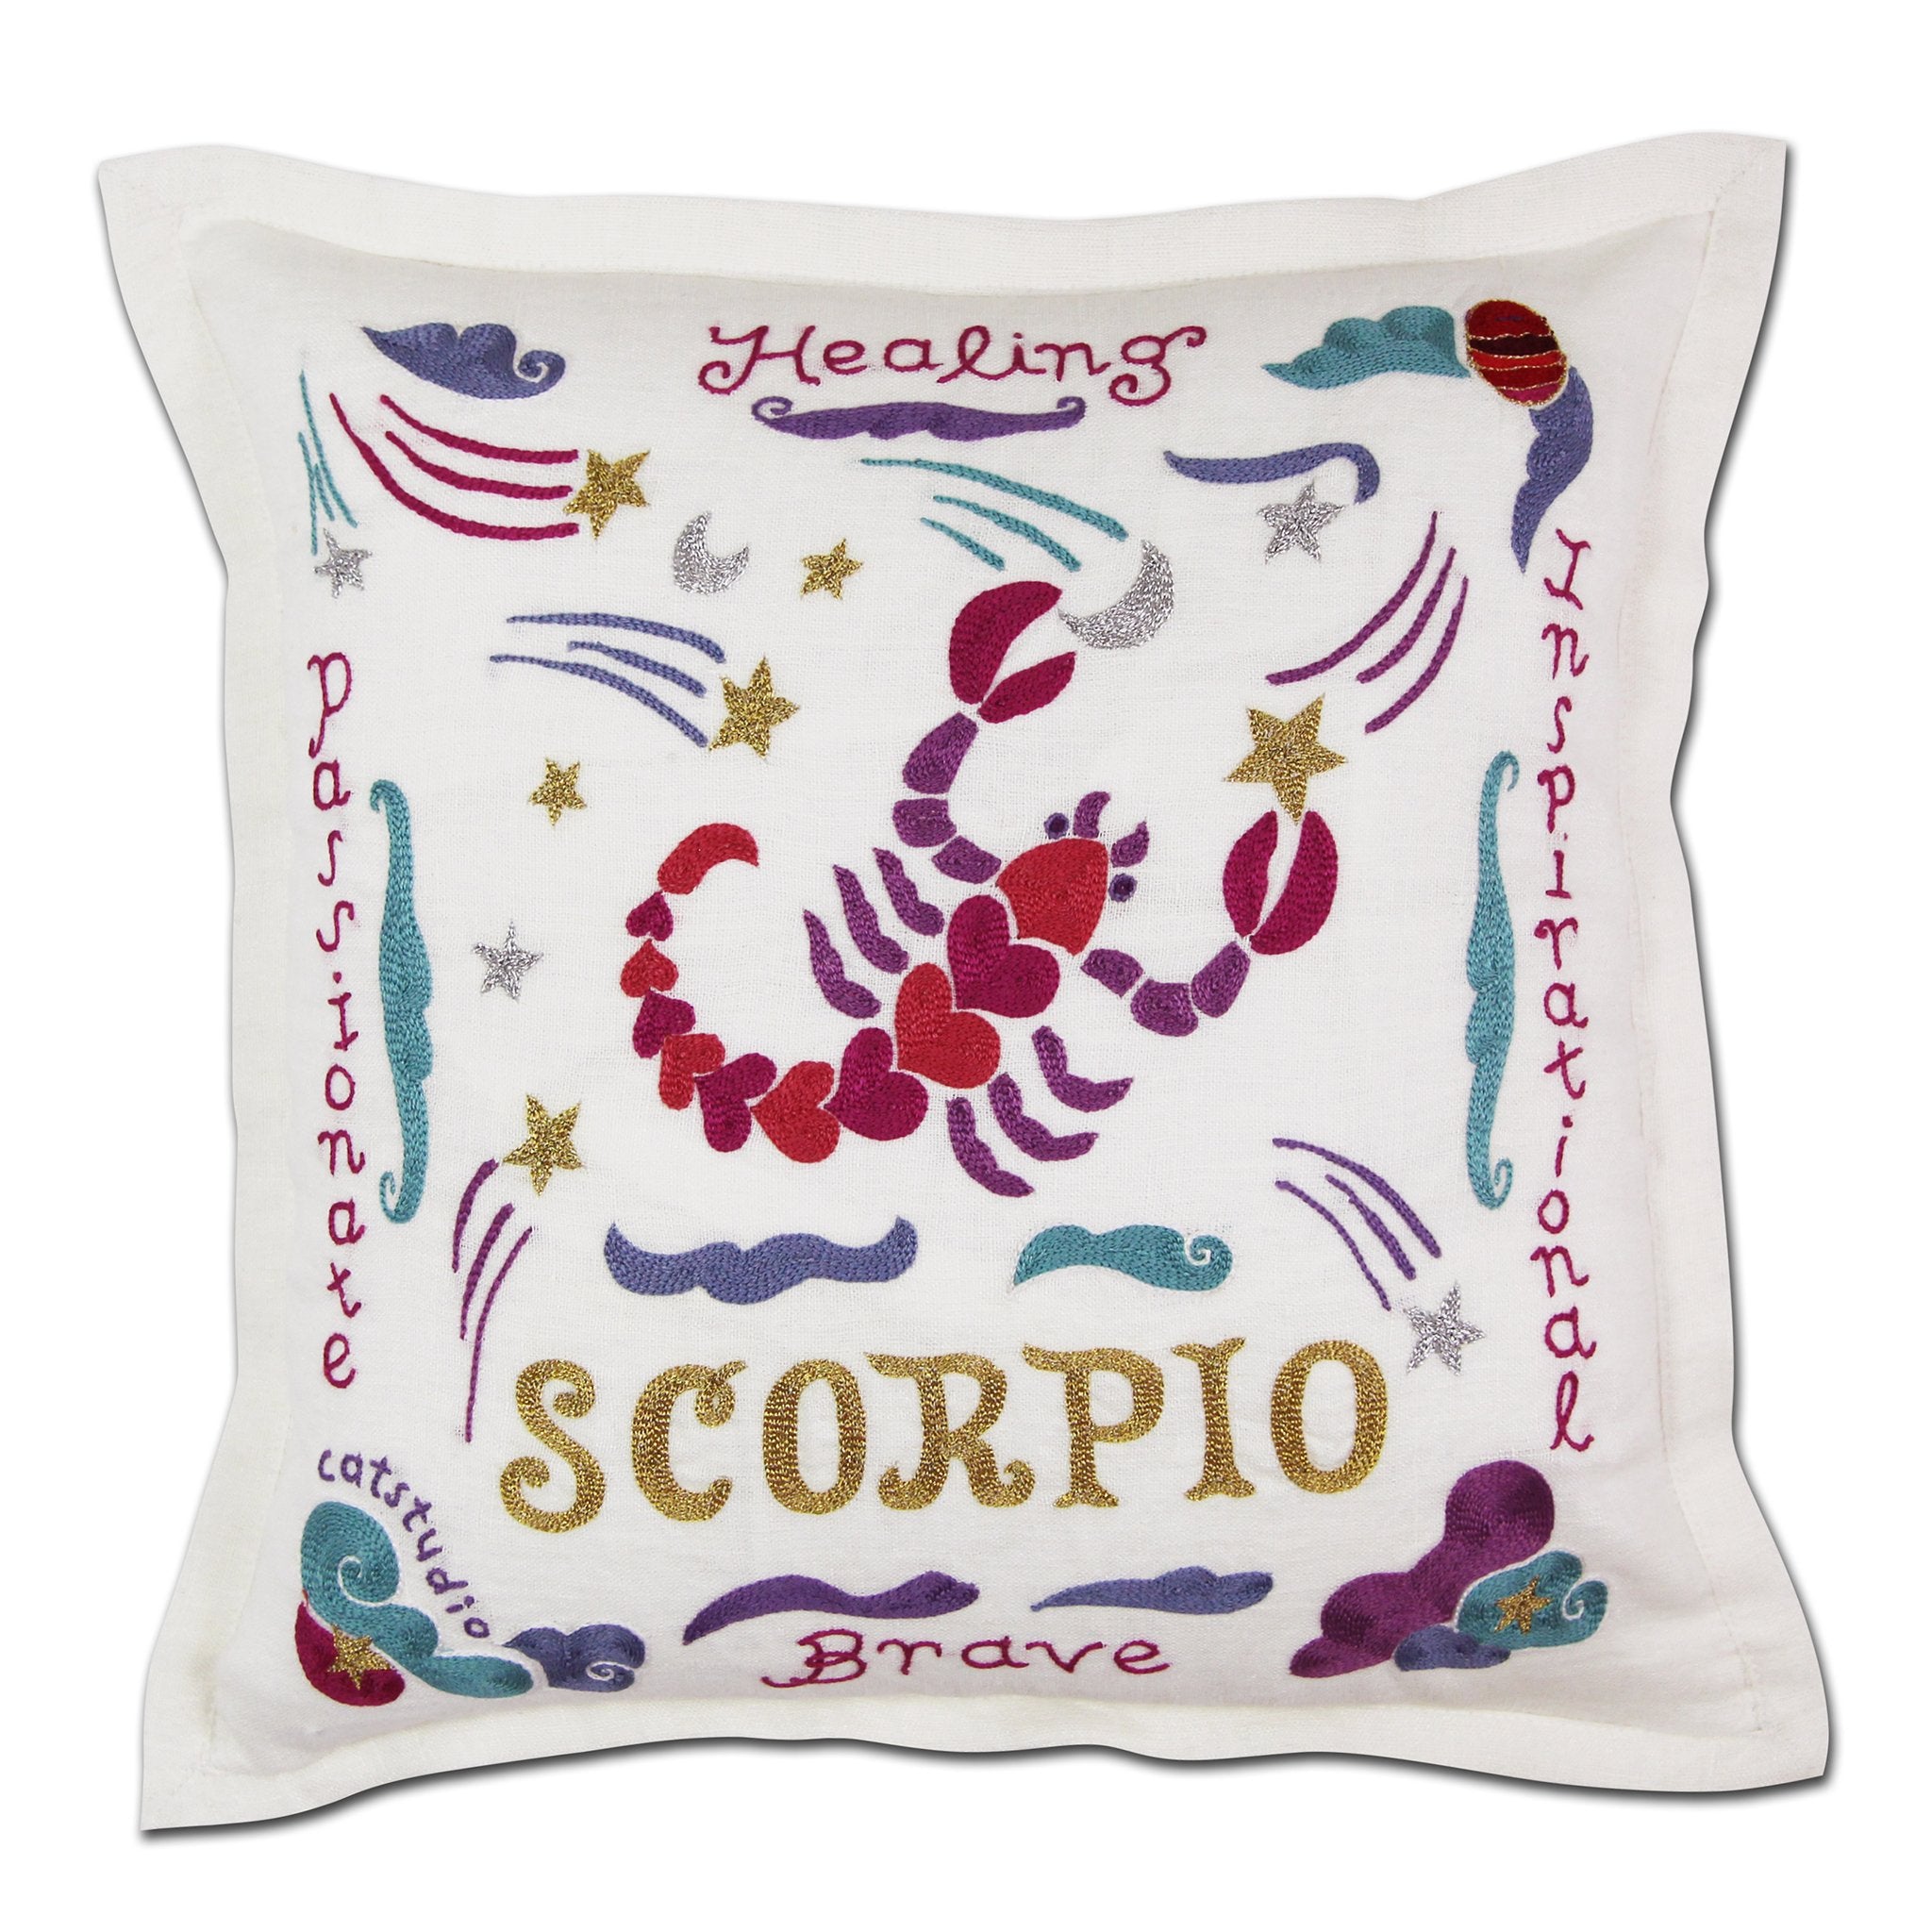 Scorpio Astrology Hand-Embroidered Pillow